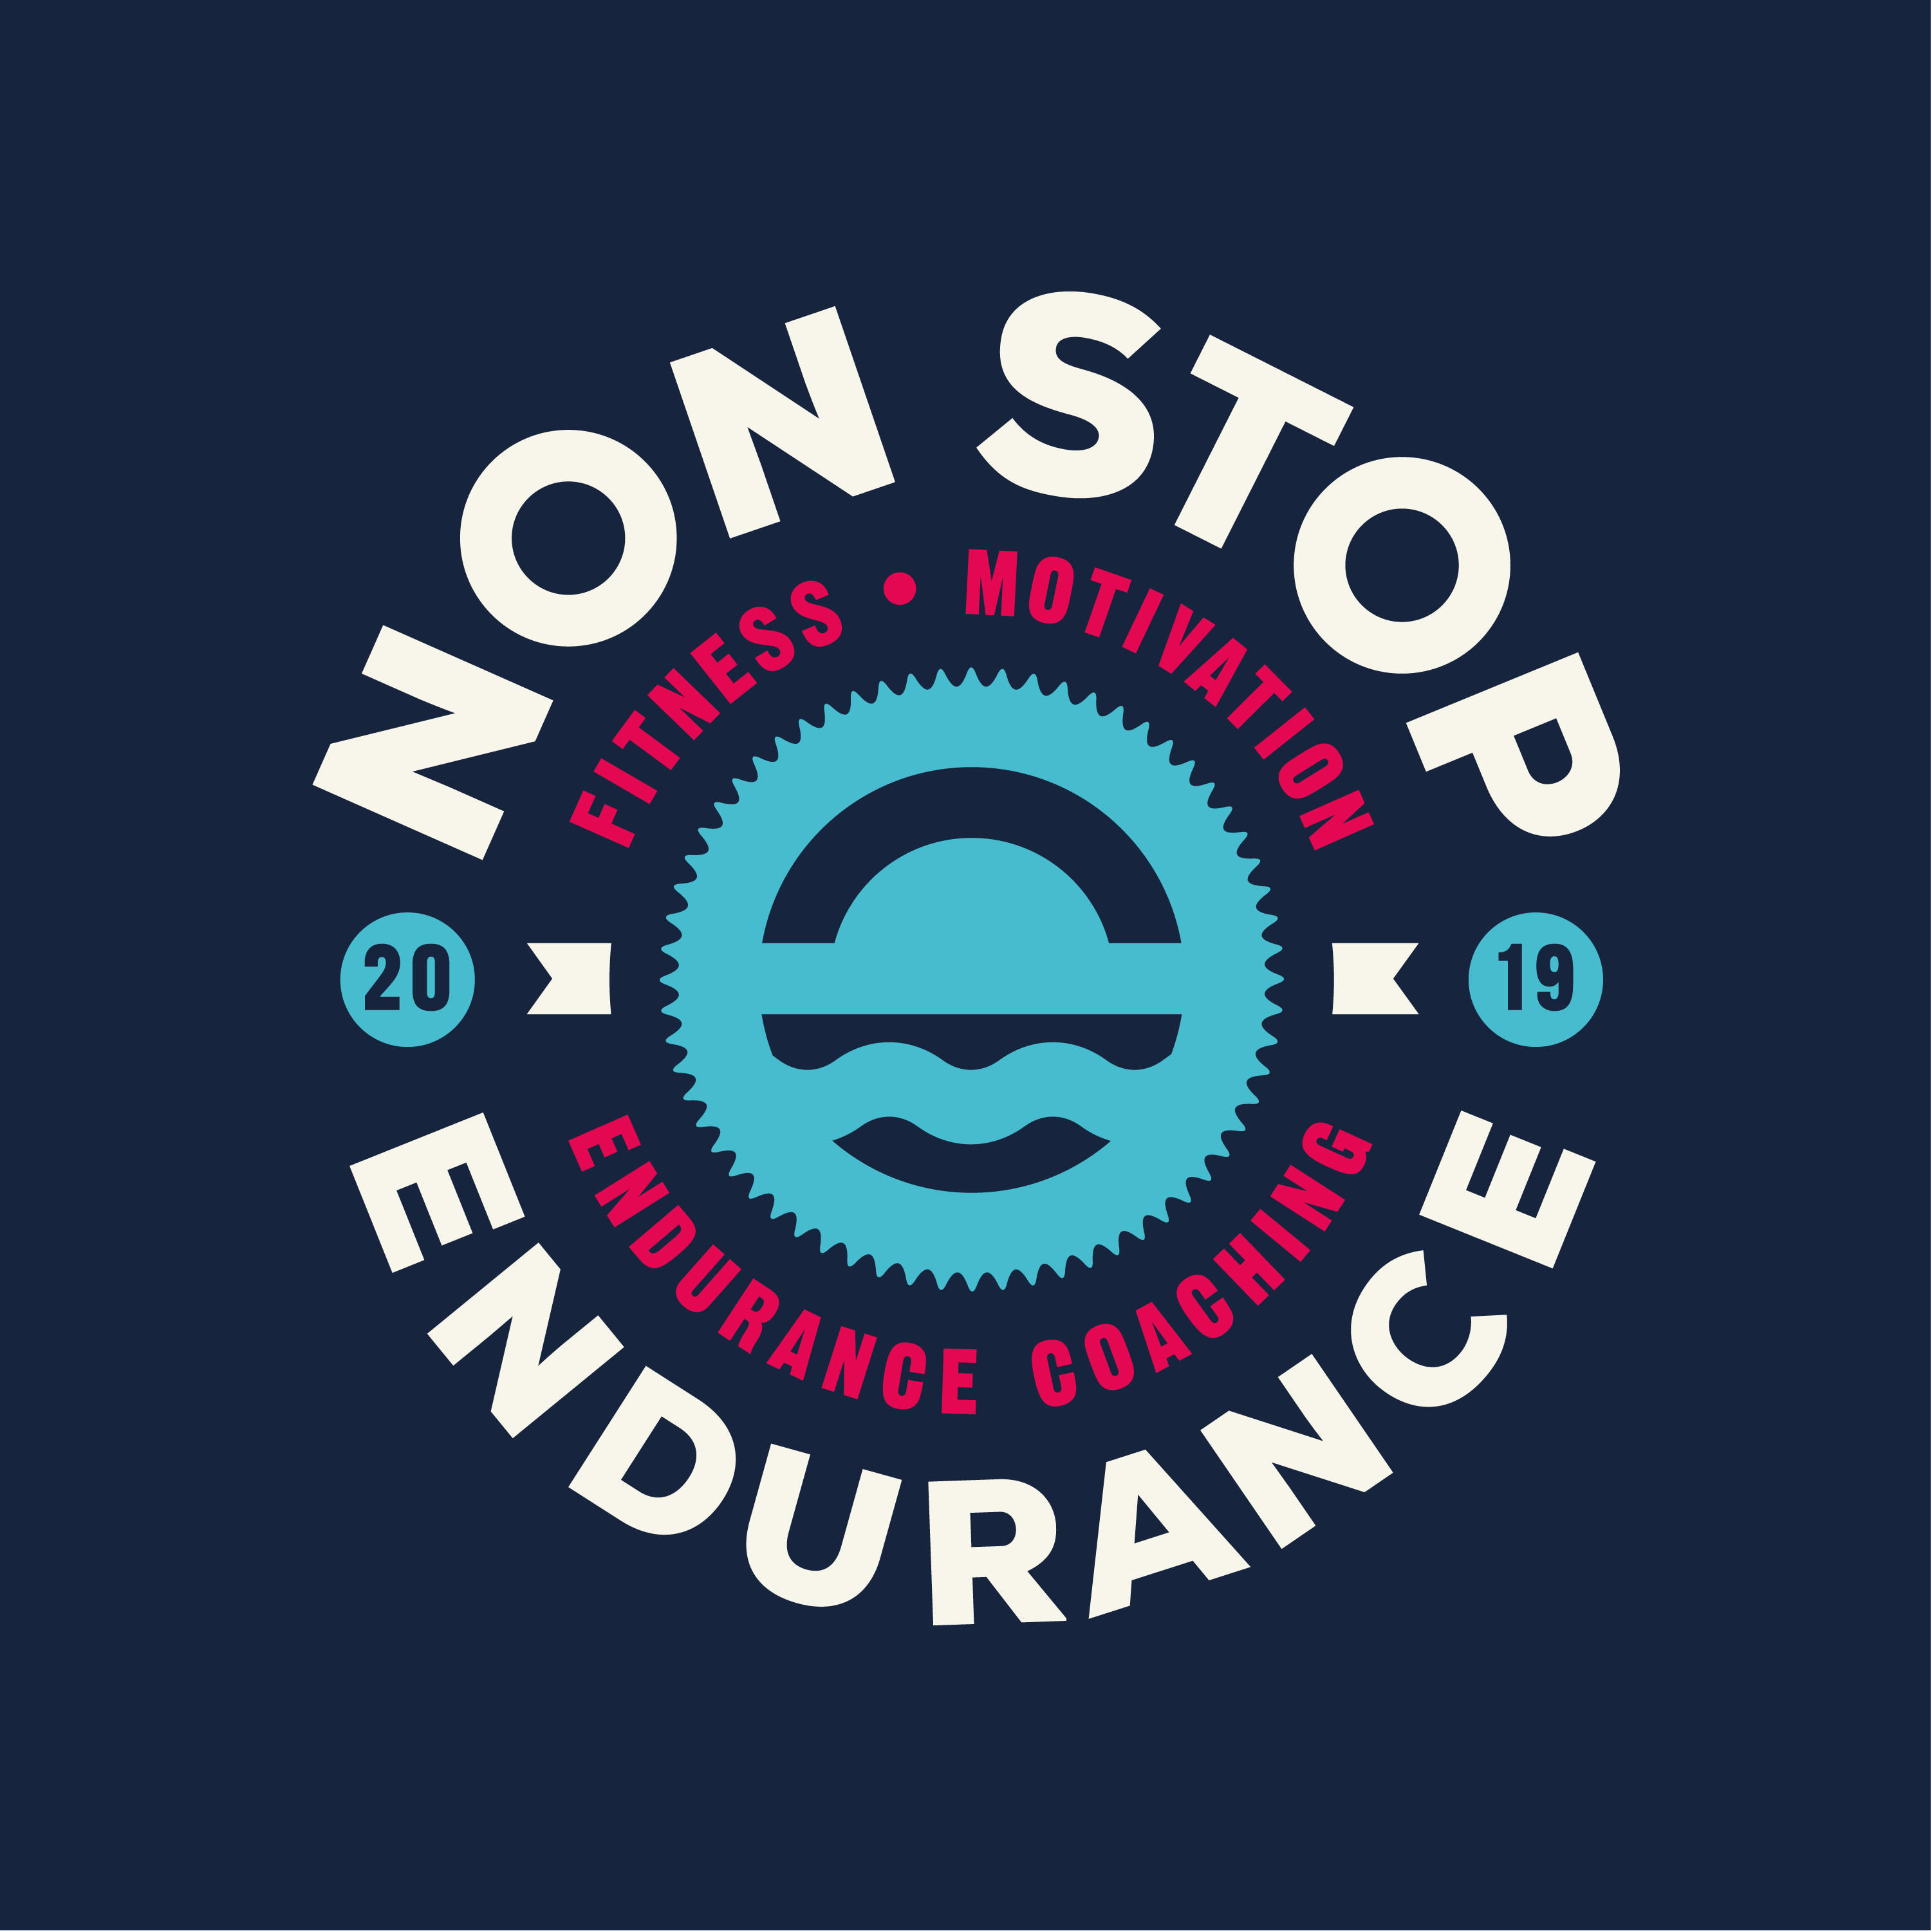 Club Image for NON STOP ENDURANCE